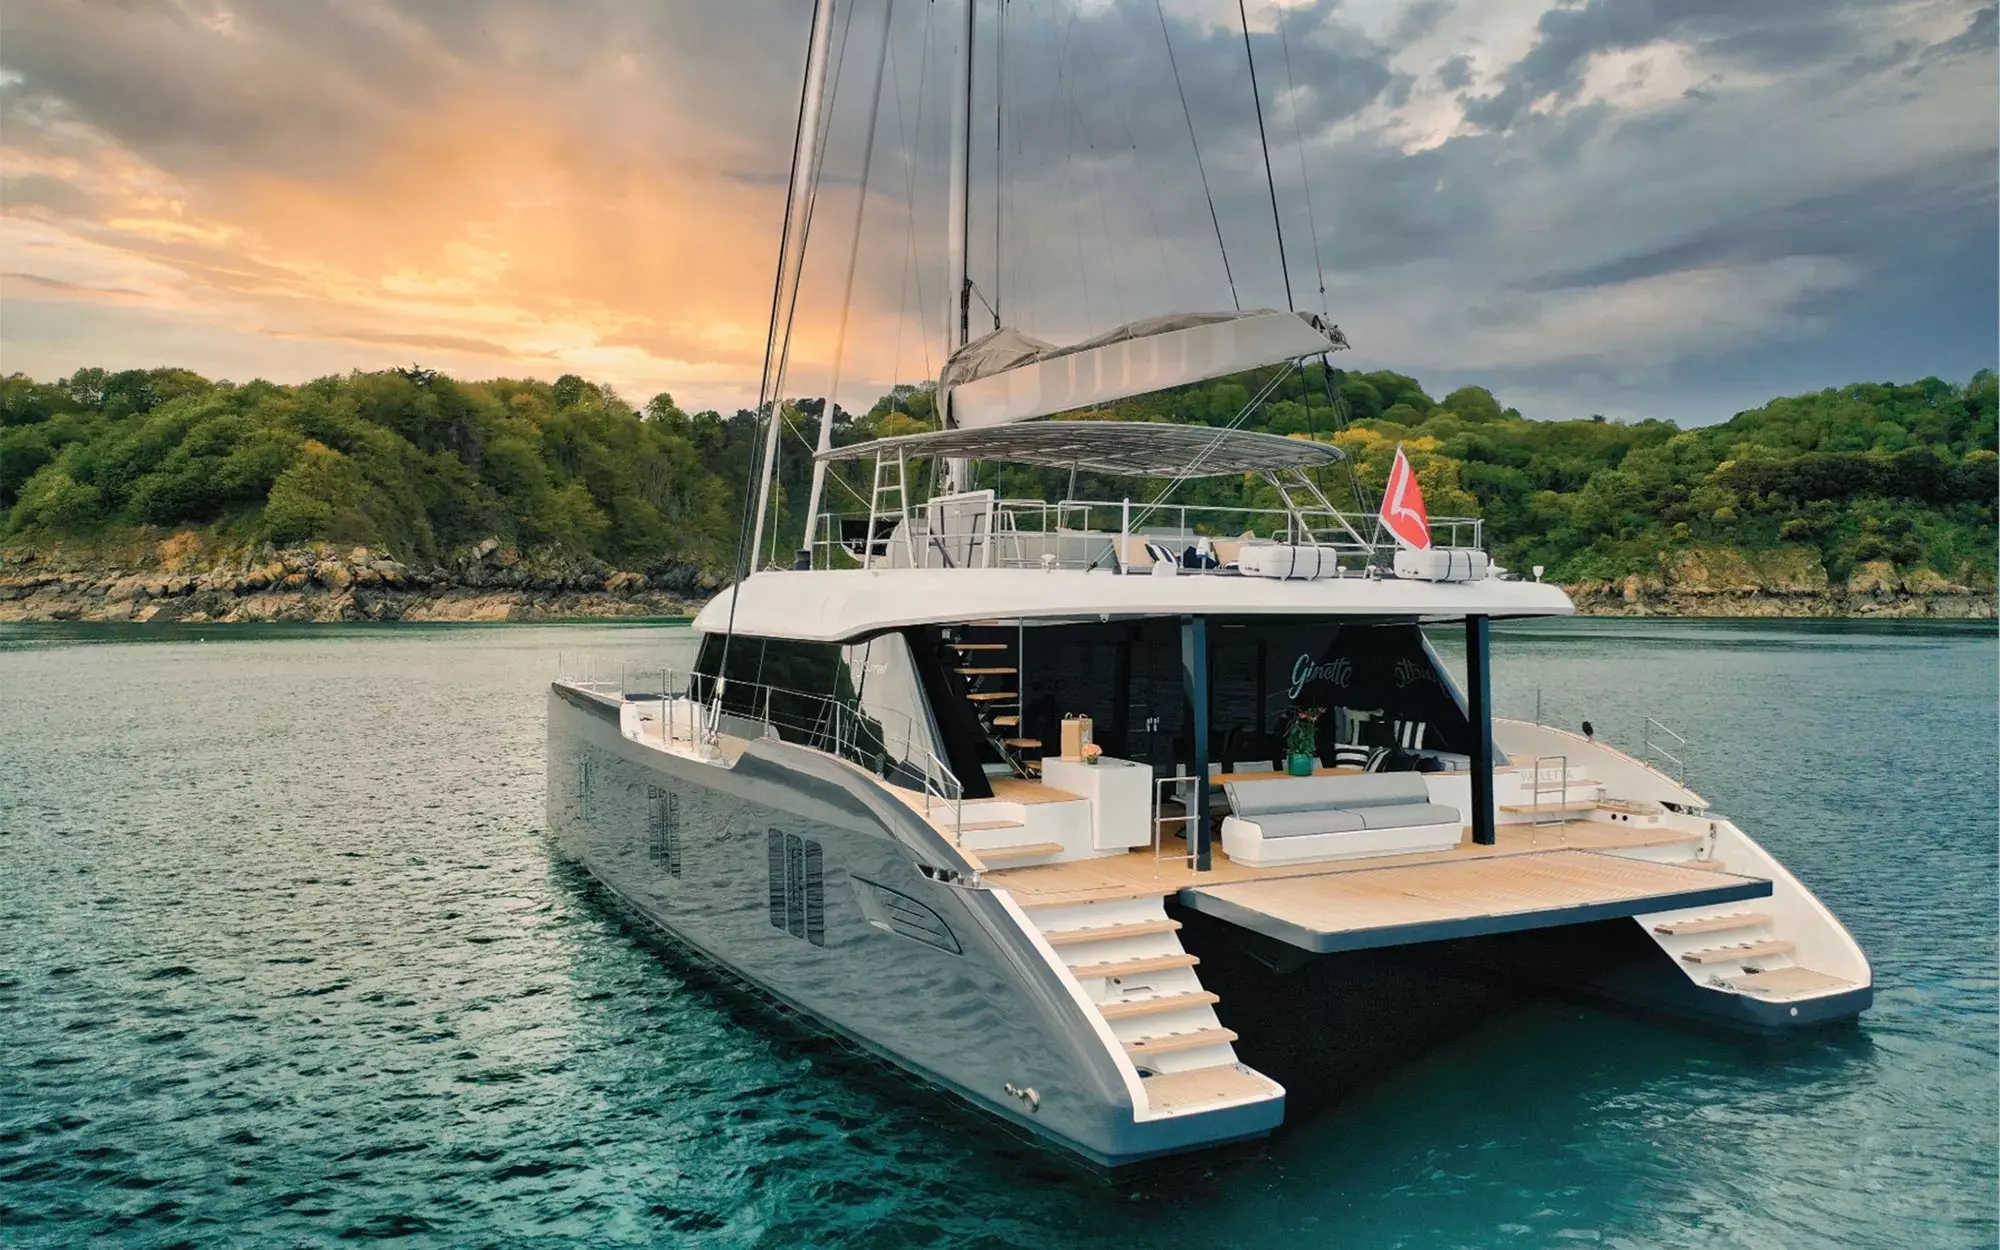 Ginette by Sunreef Yachts - Top rates for a Charter of a private Luxury Catamaran in French Polynesia